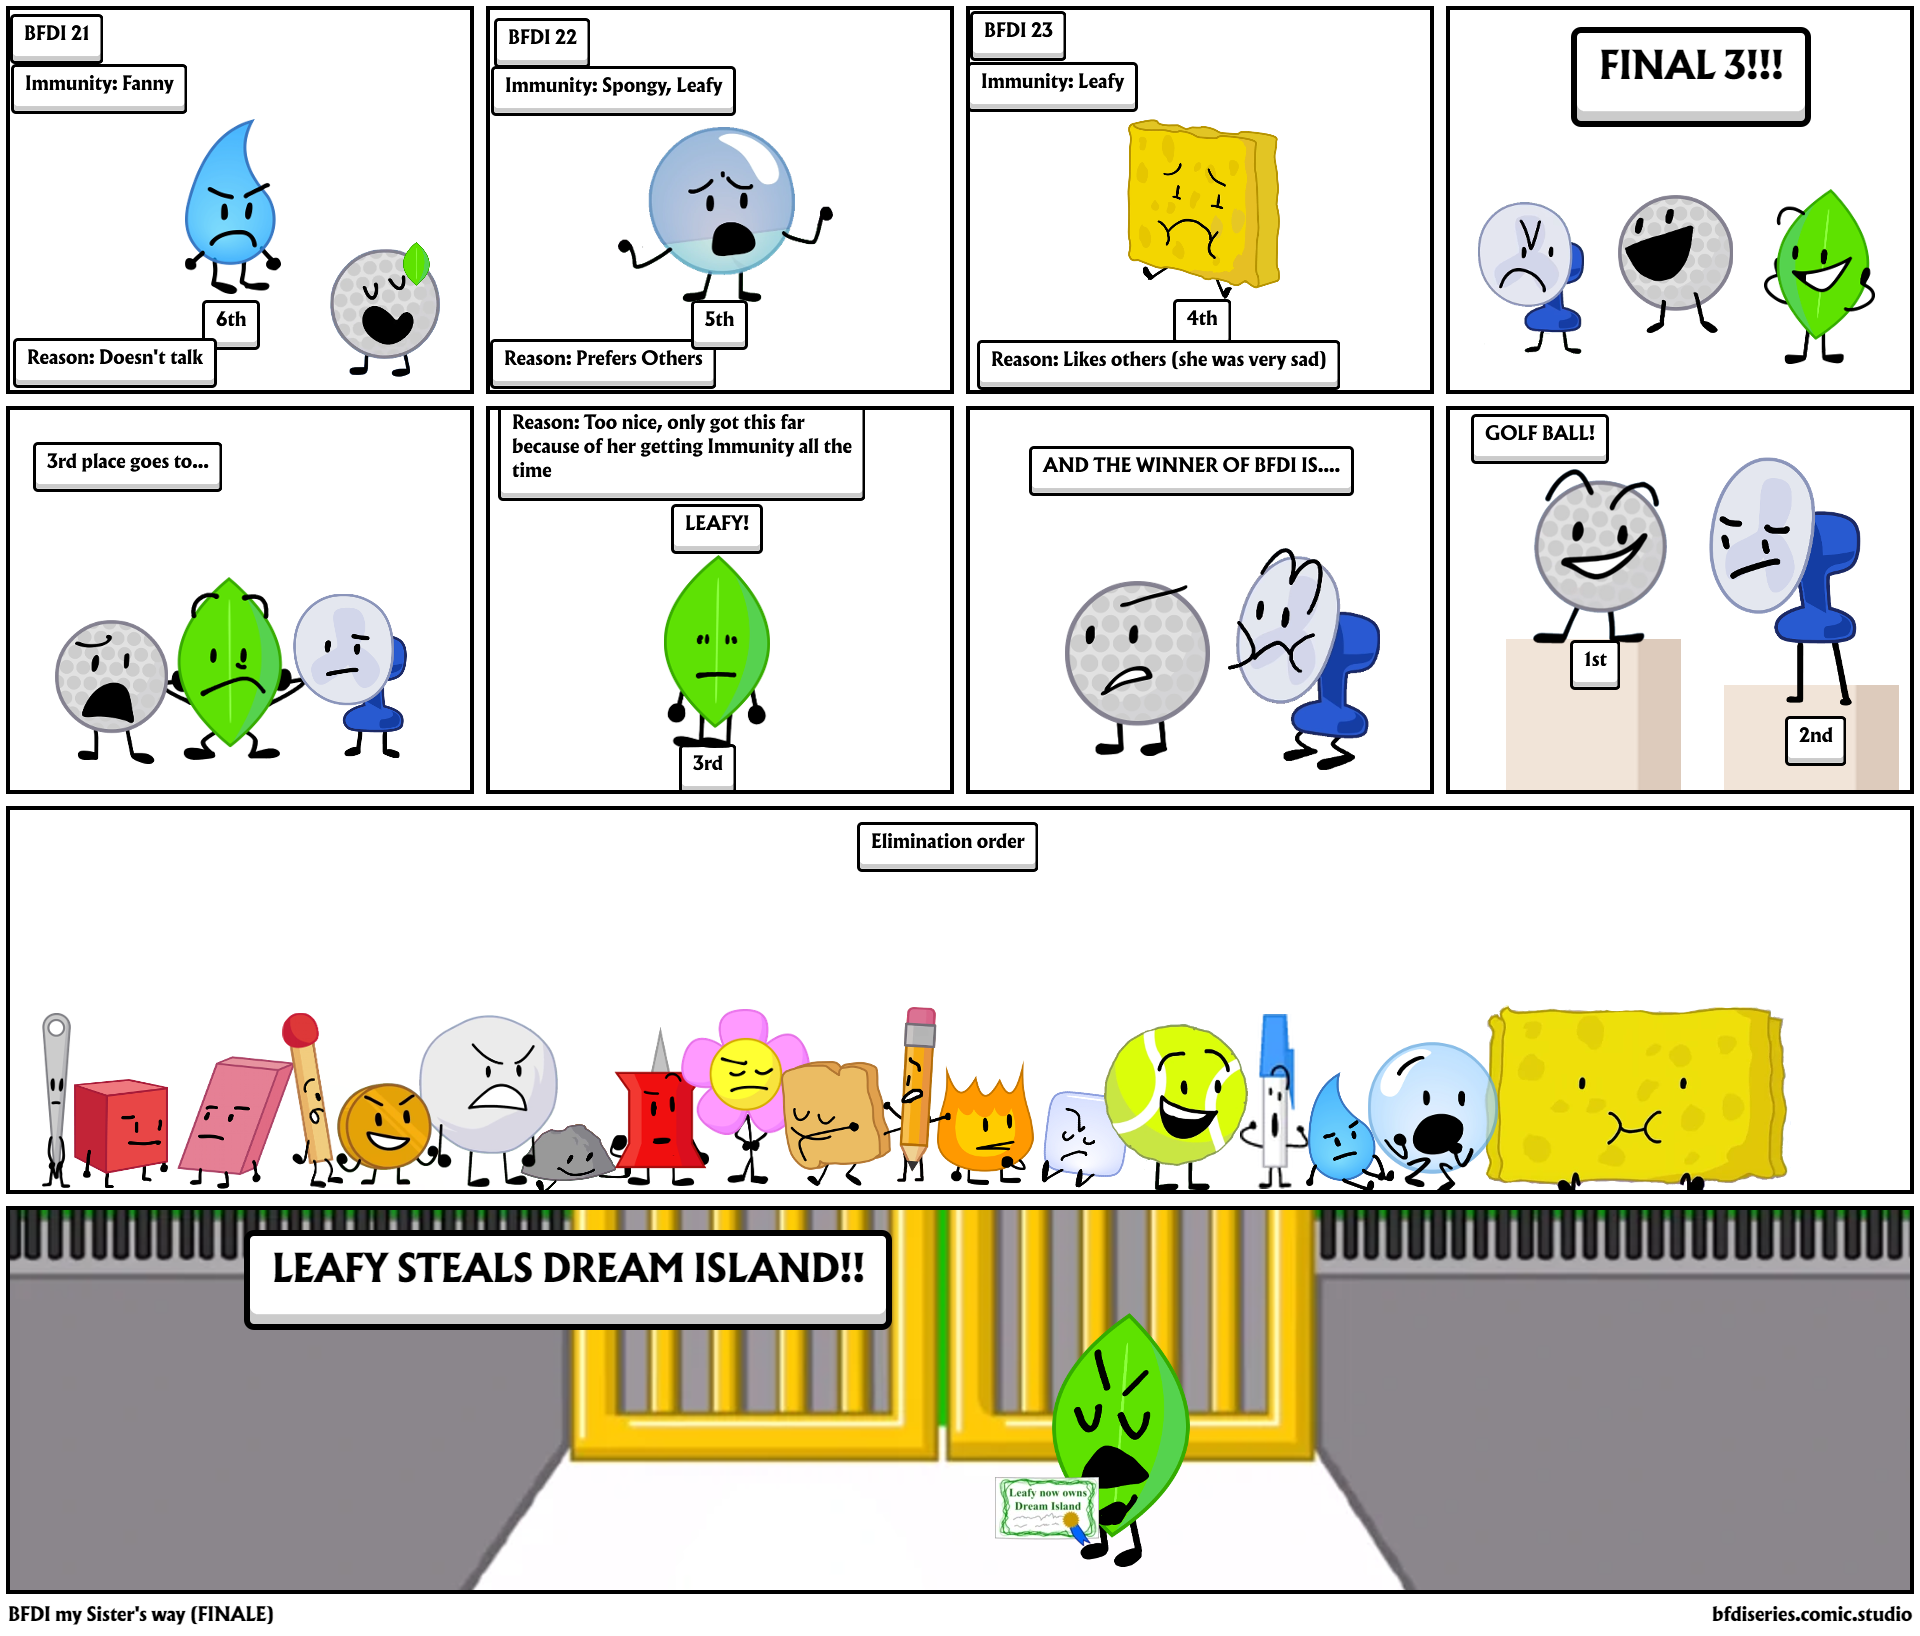 BFDI my Sister's way (FINALE)